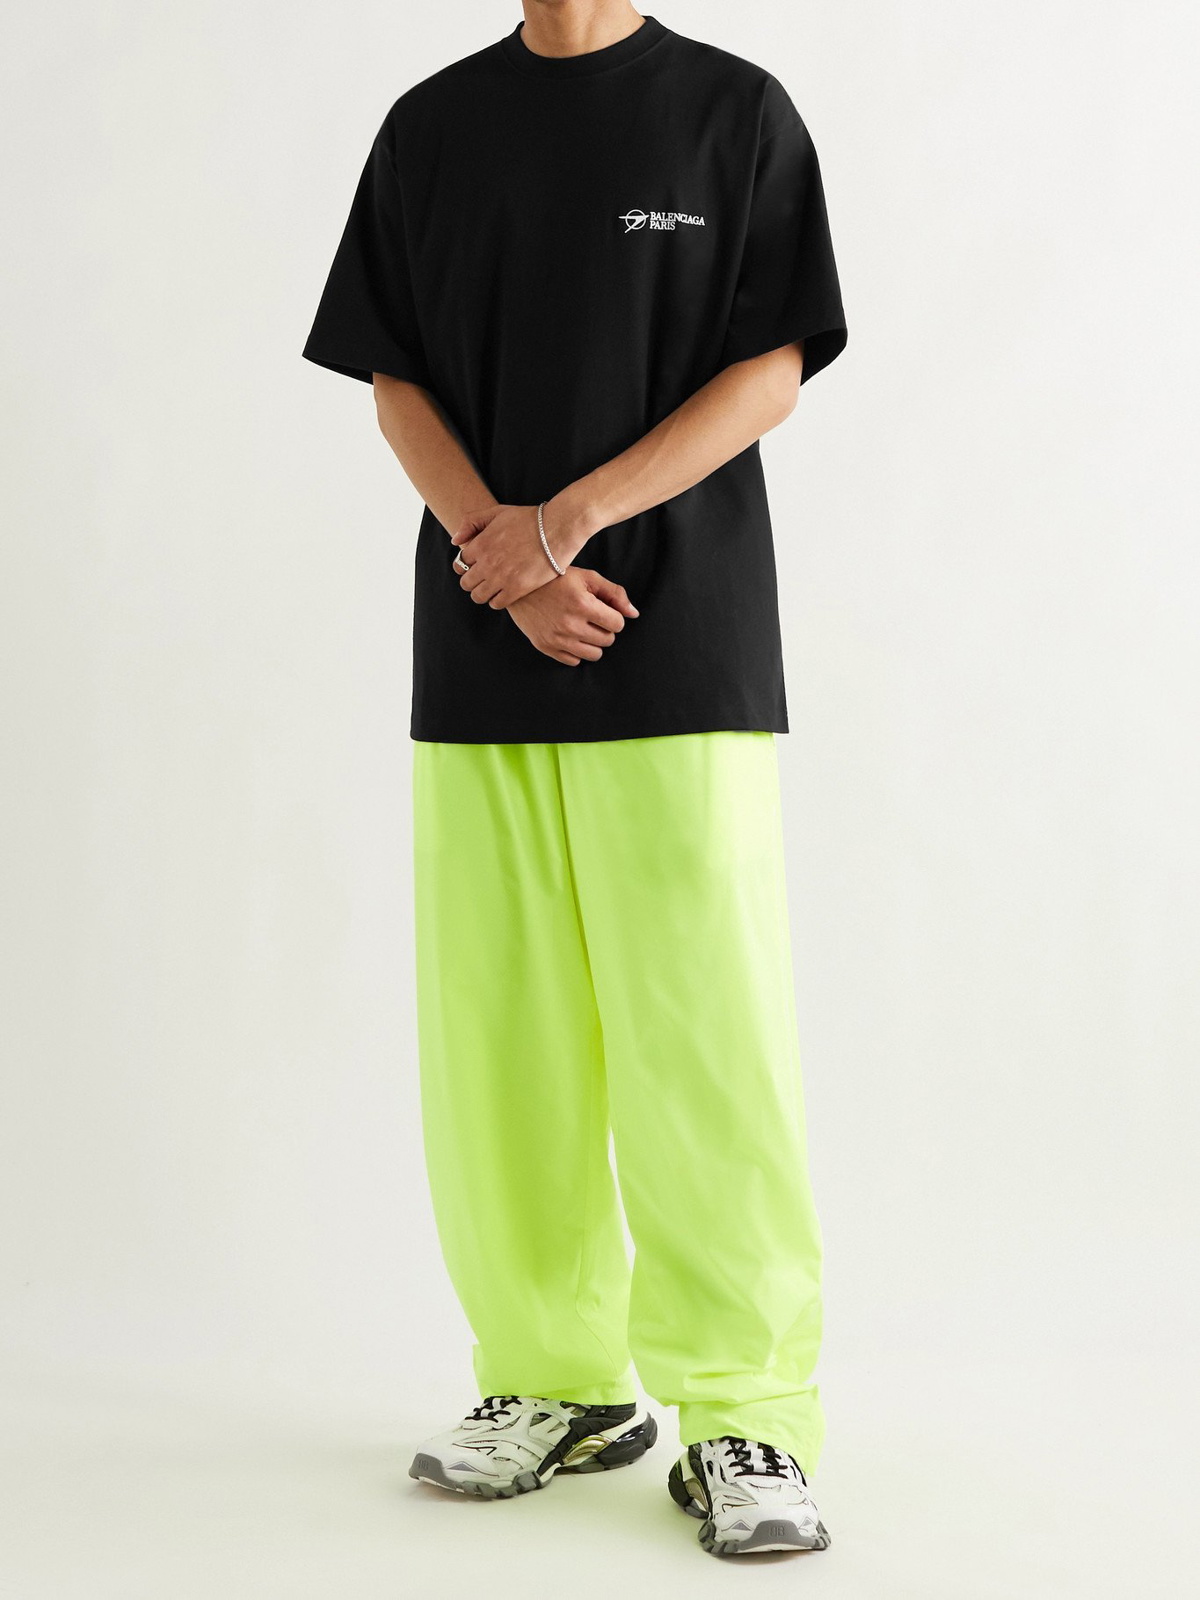 BALENCIAGA Oversized Logo-Embroidered Cotton-Jersey T-Shirt for